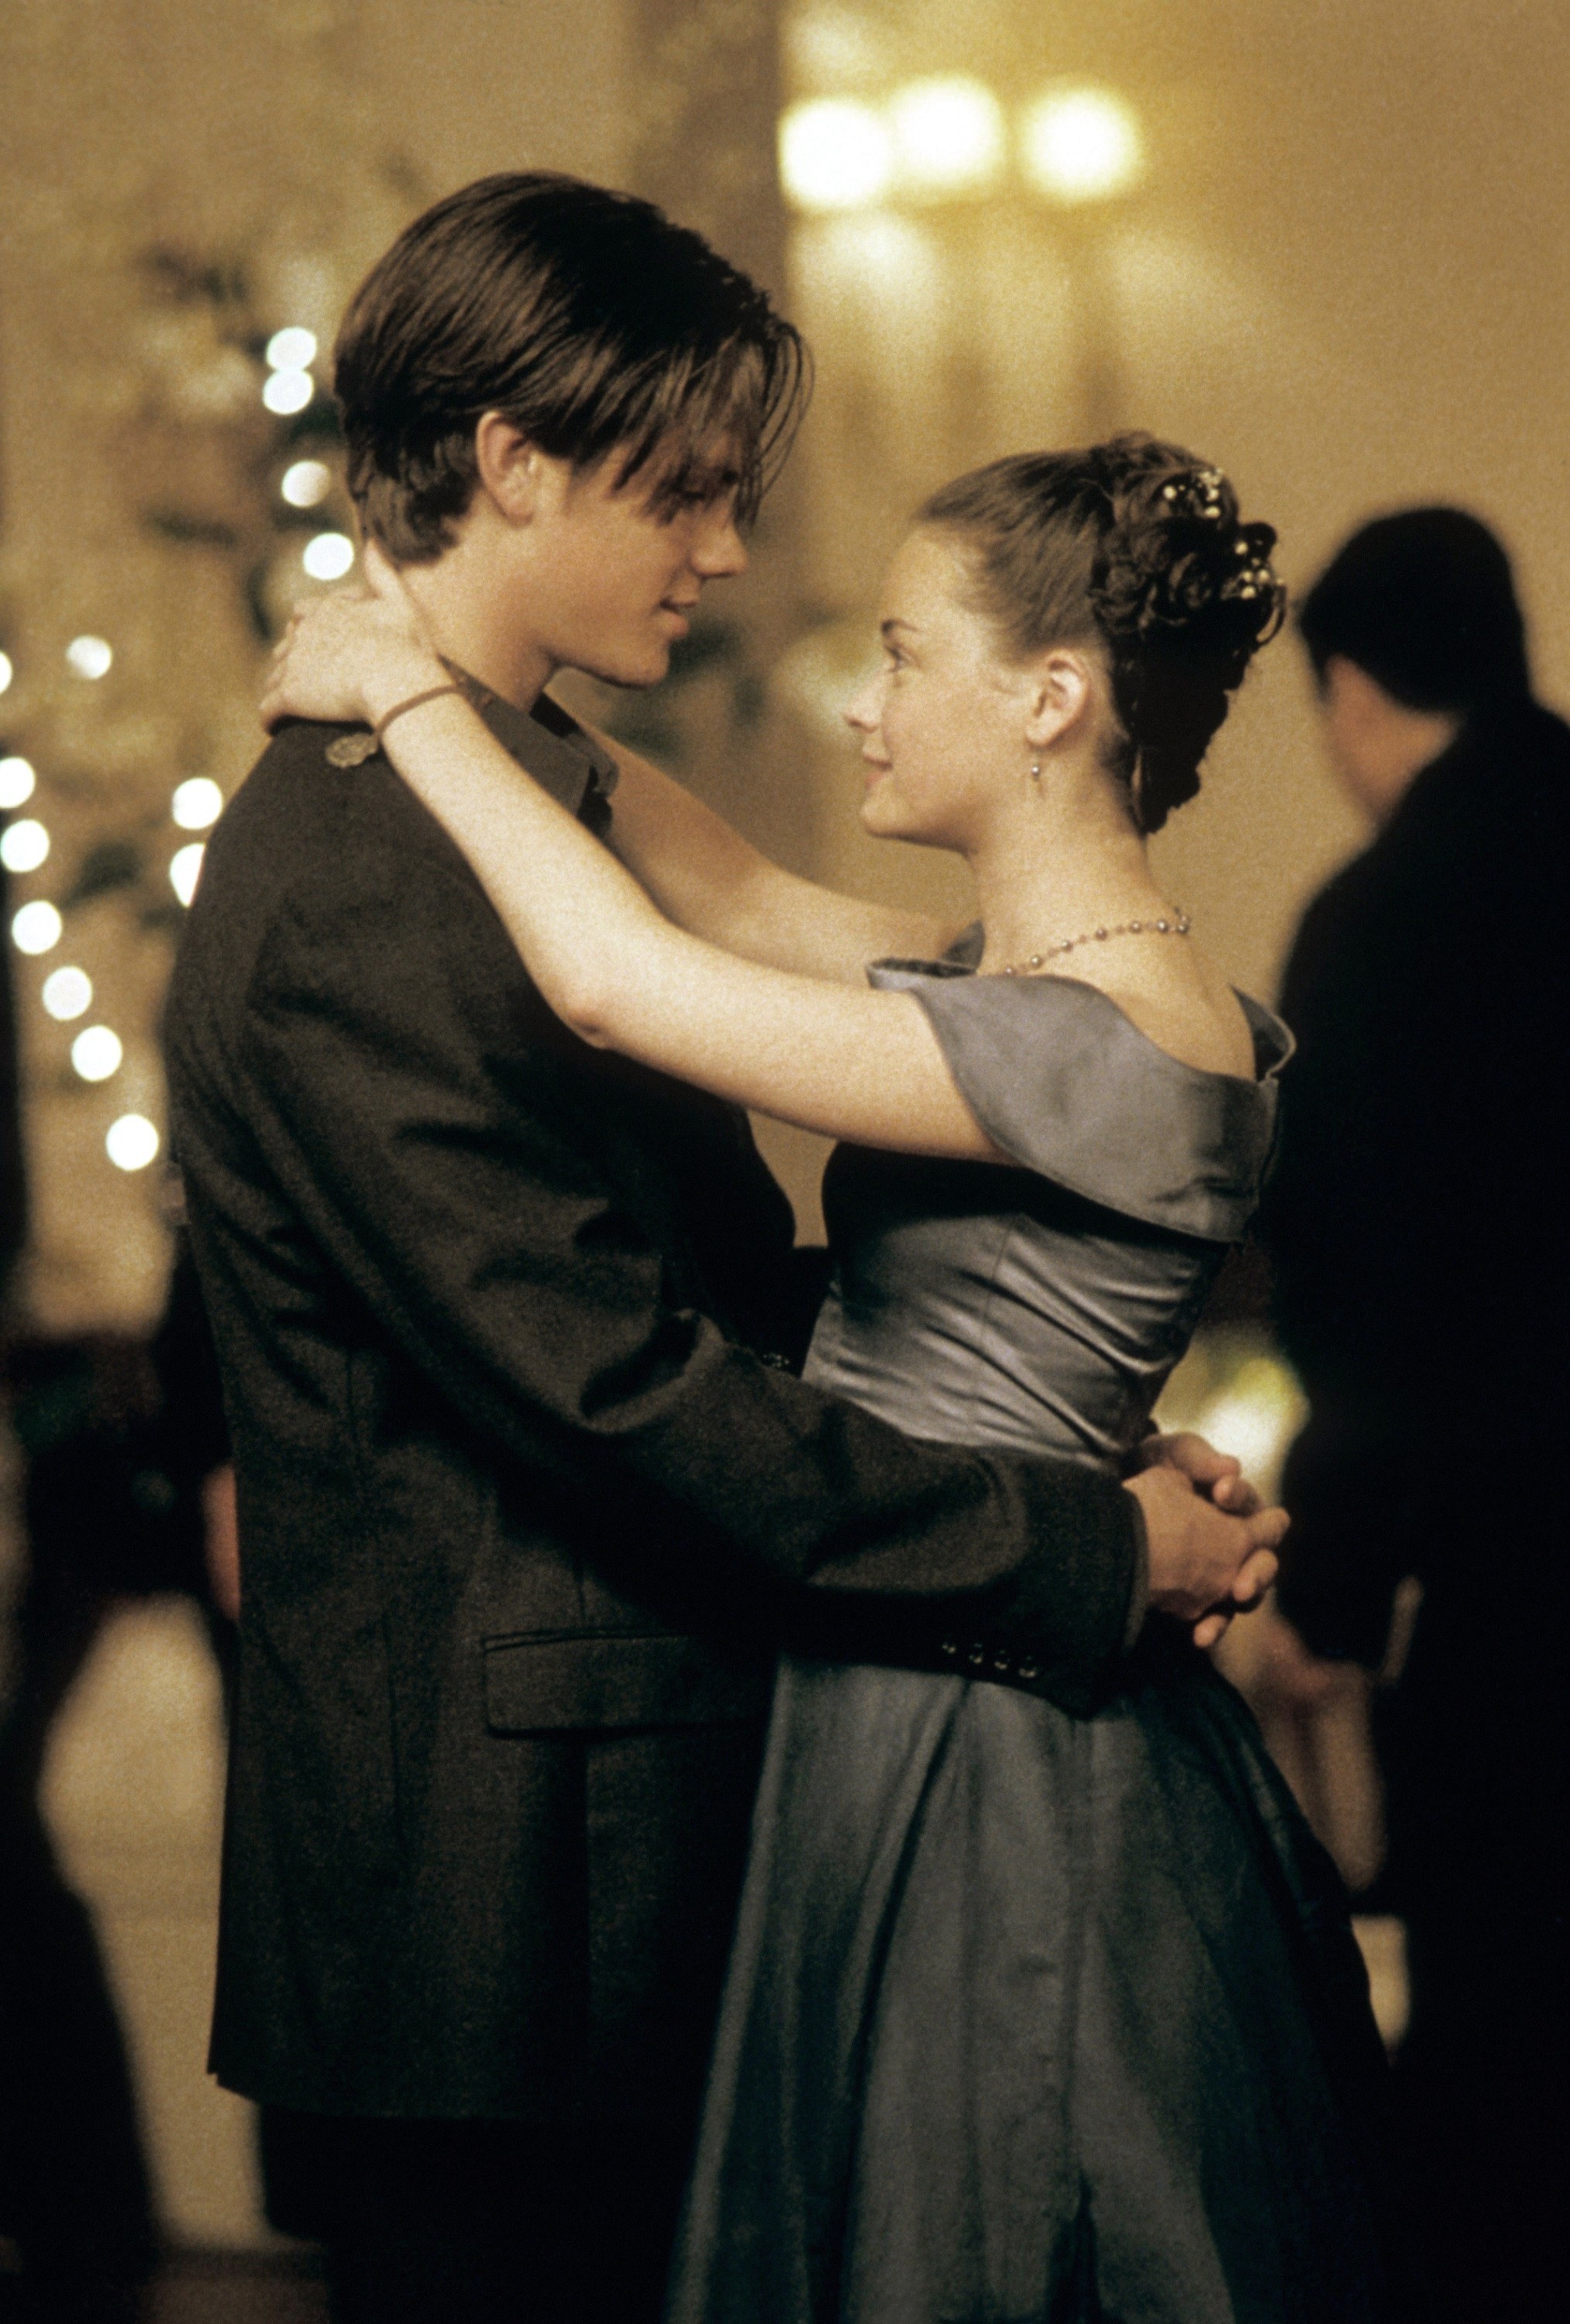 alexis and jared dancing on the gilmore girls